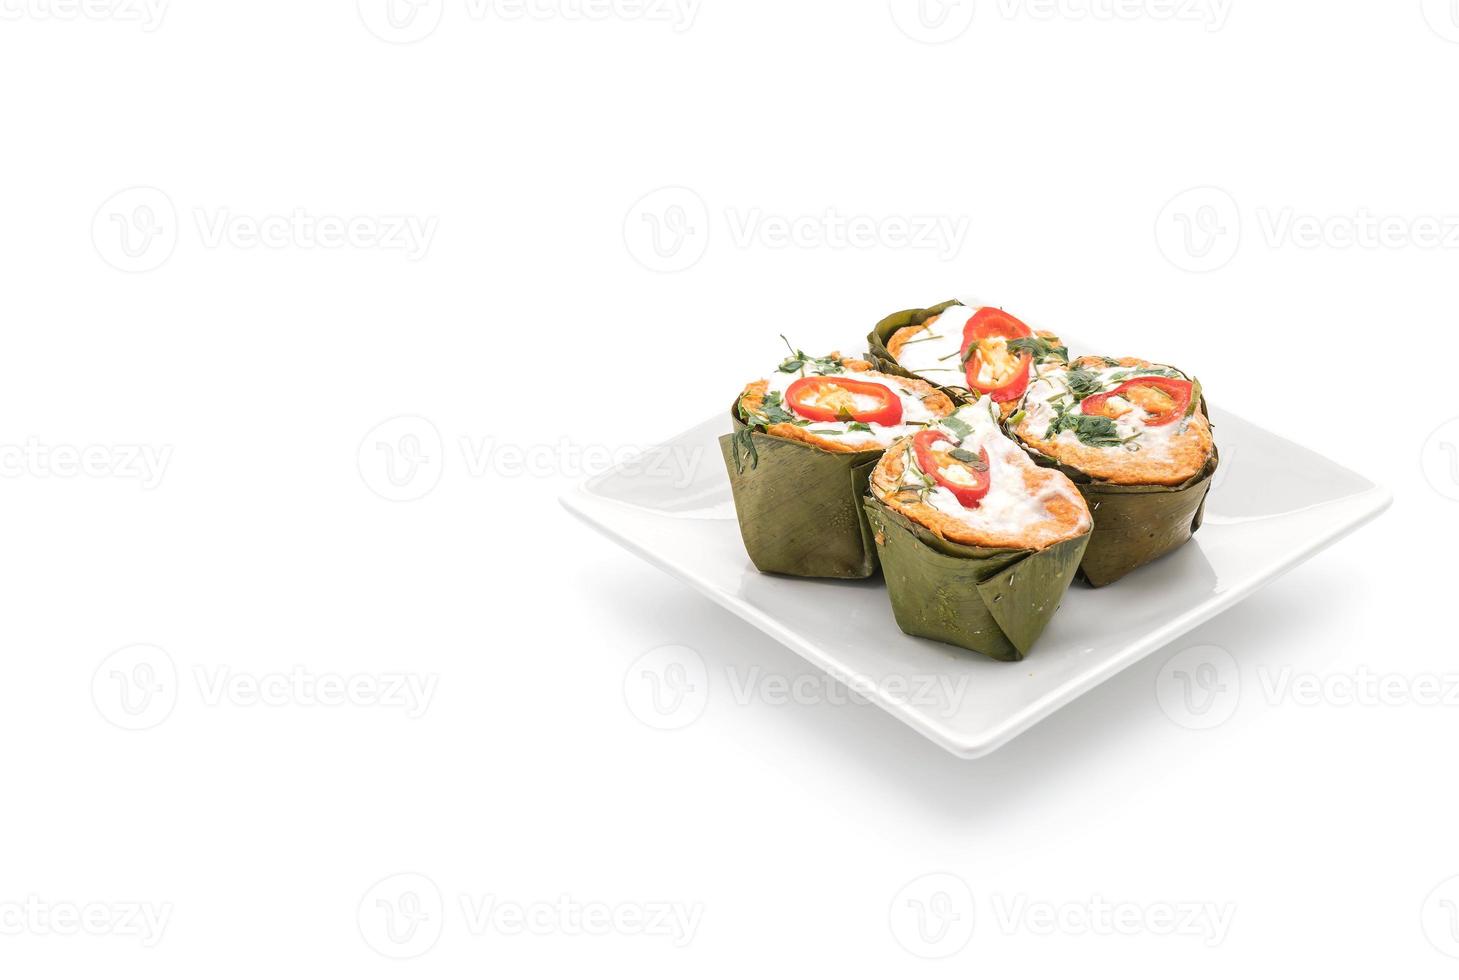 Thai steamed curried fish on white background photo